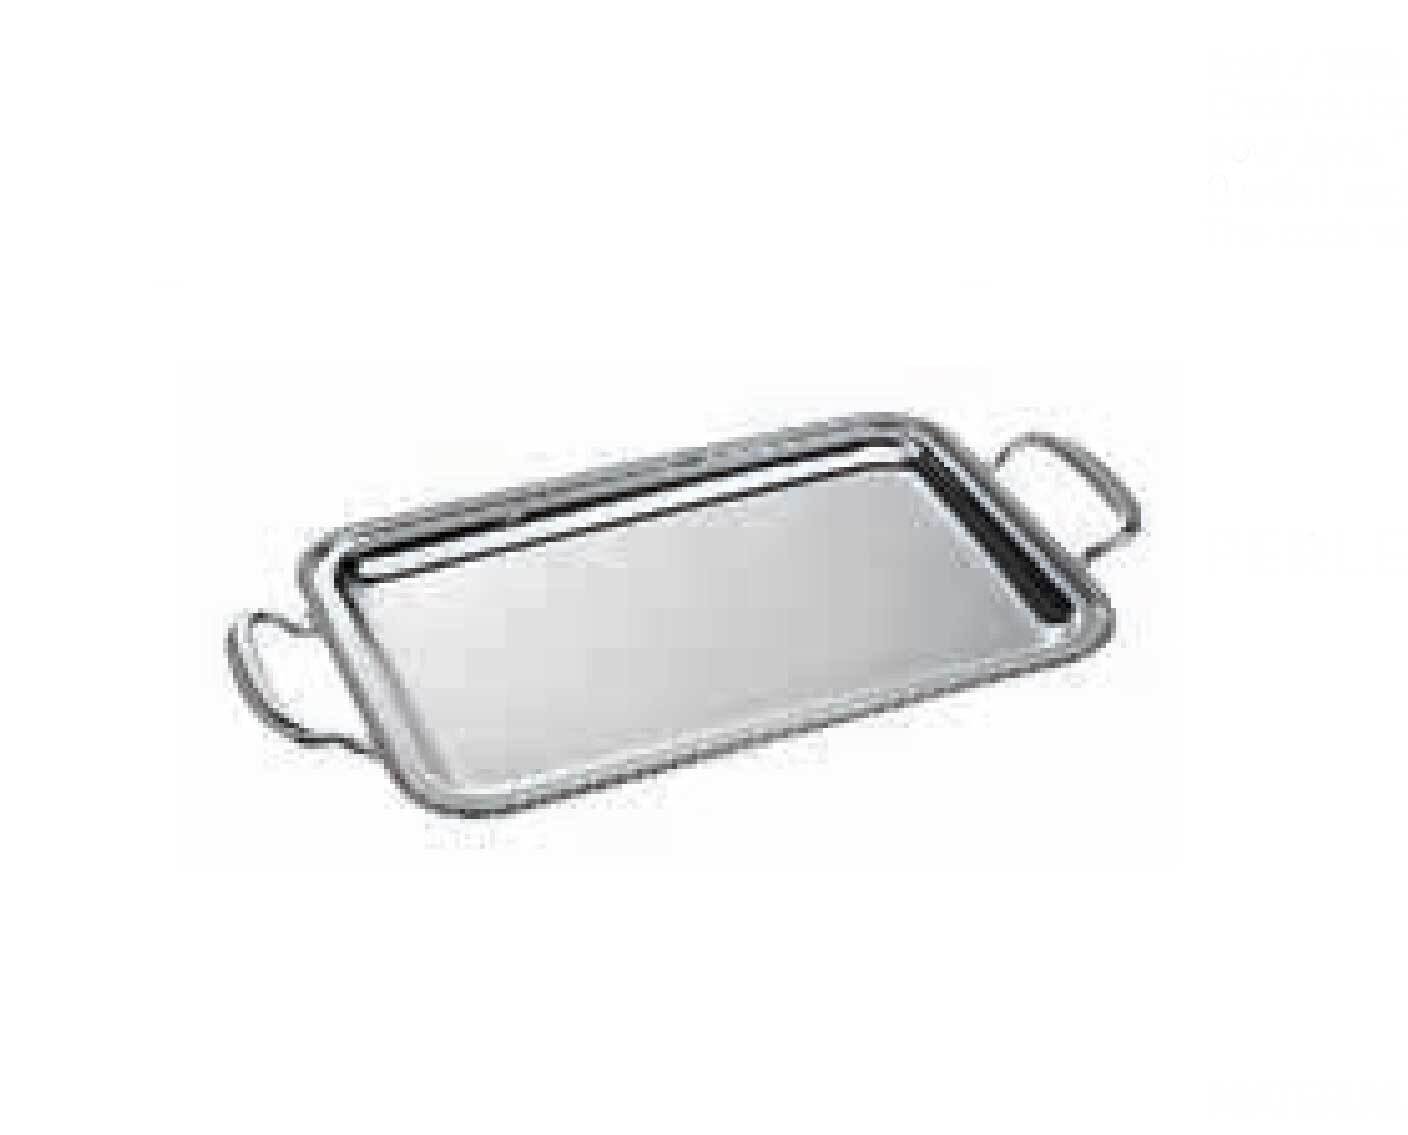 Ercuis Perles Rectangular Serving Tray With Handles 15.75 x 10.625 Inch Silver Plated F51P450-40